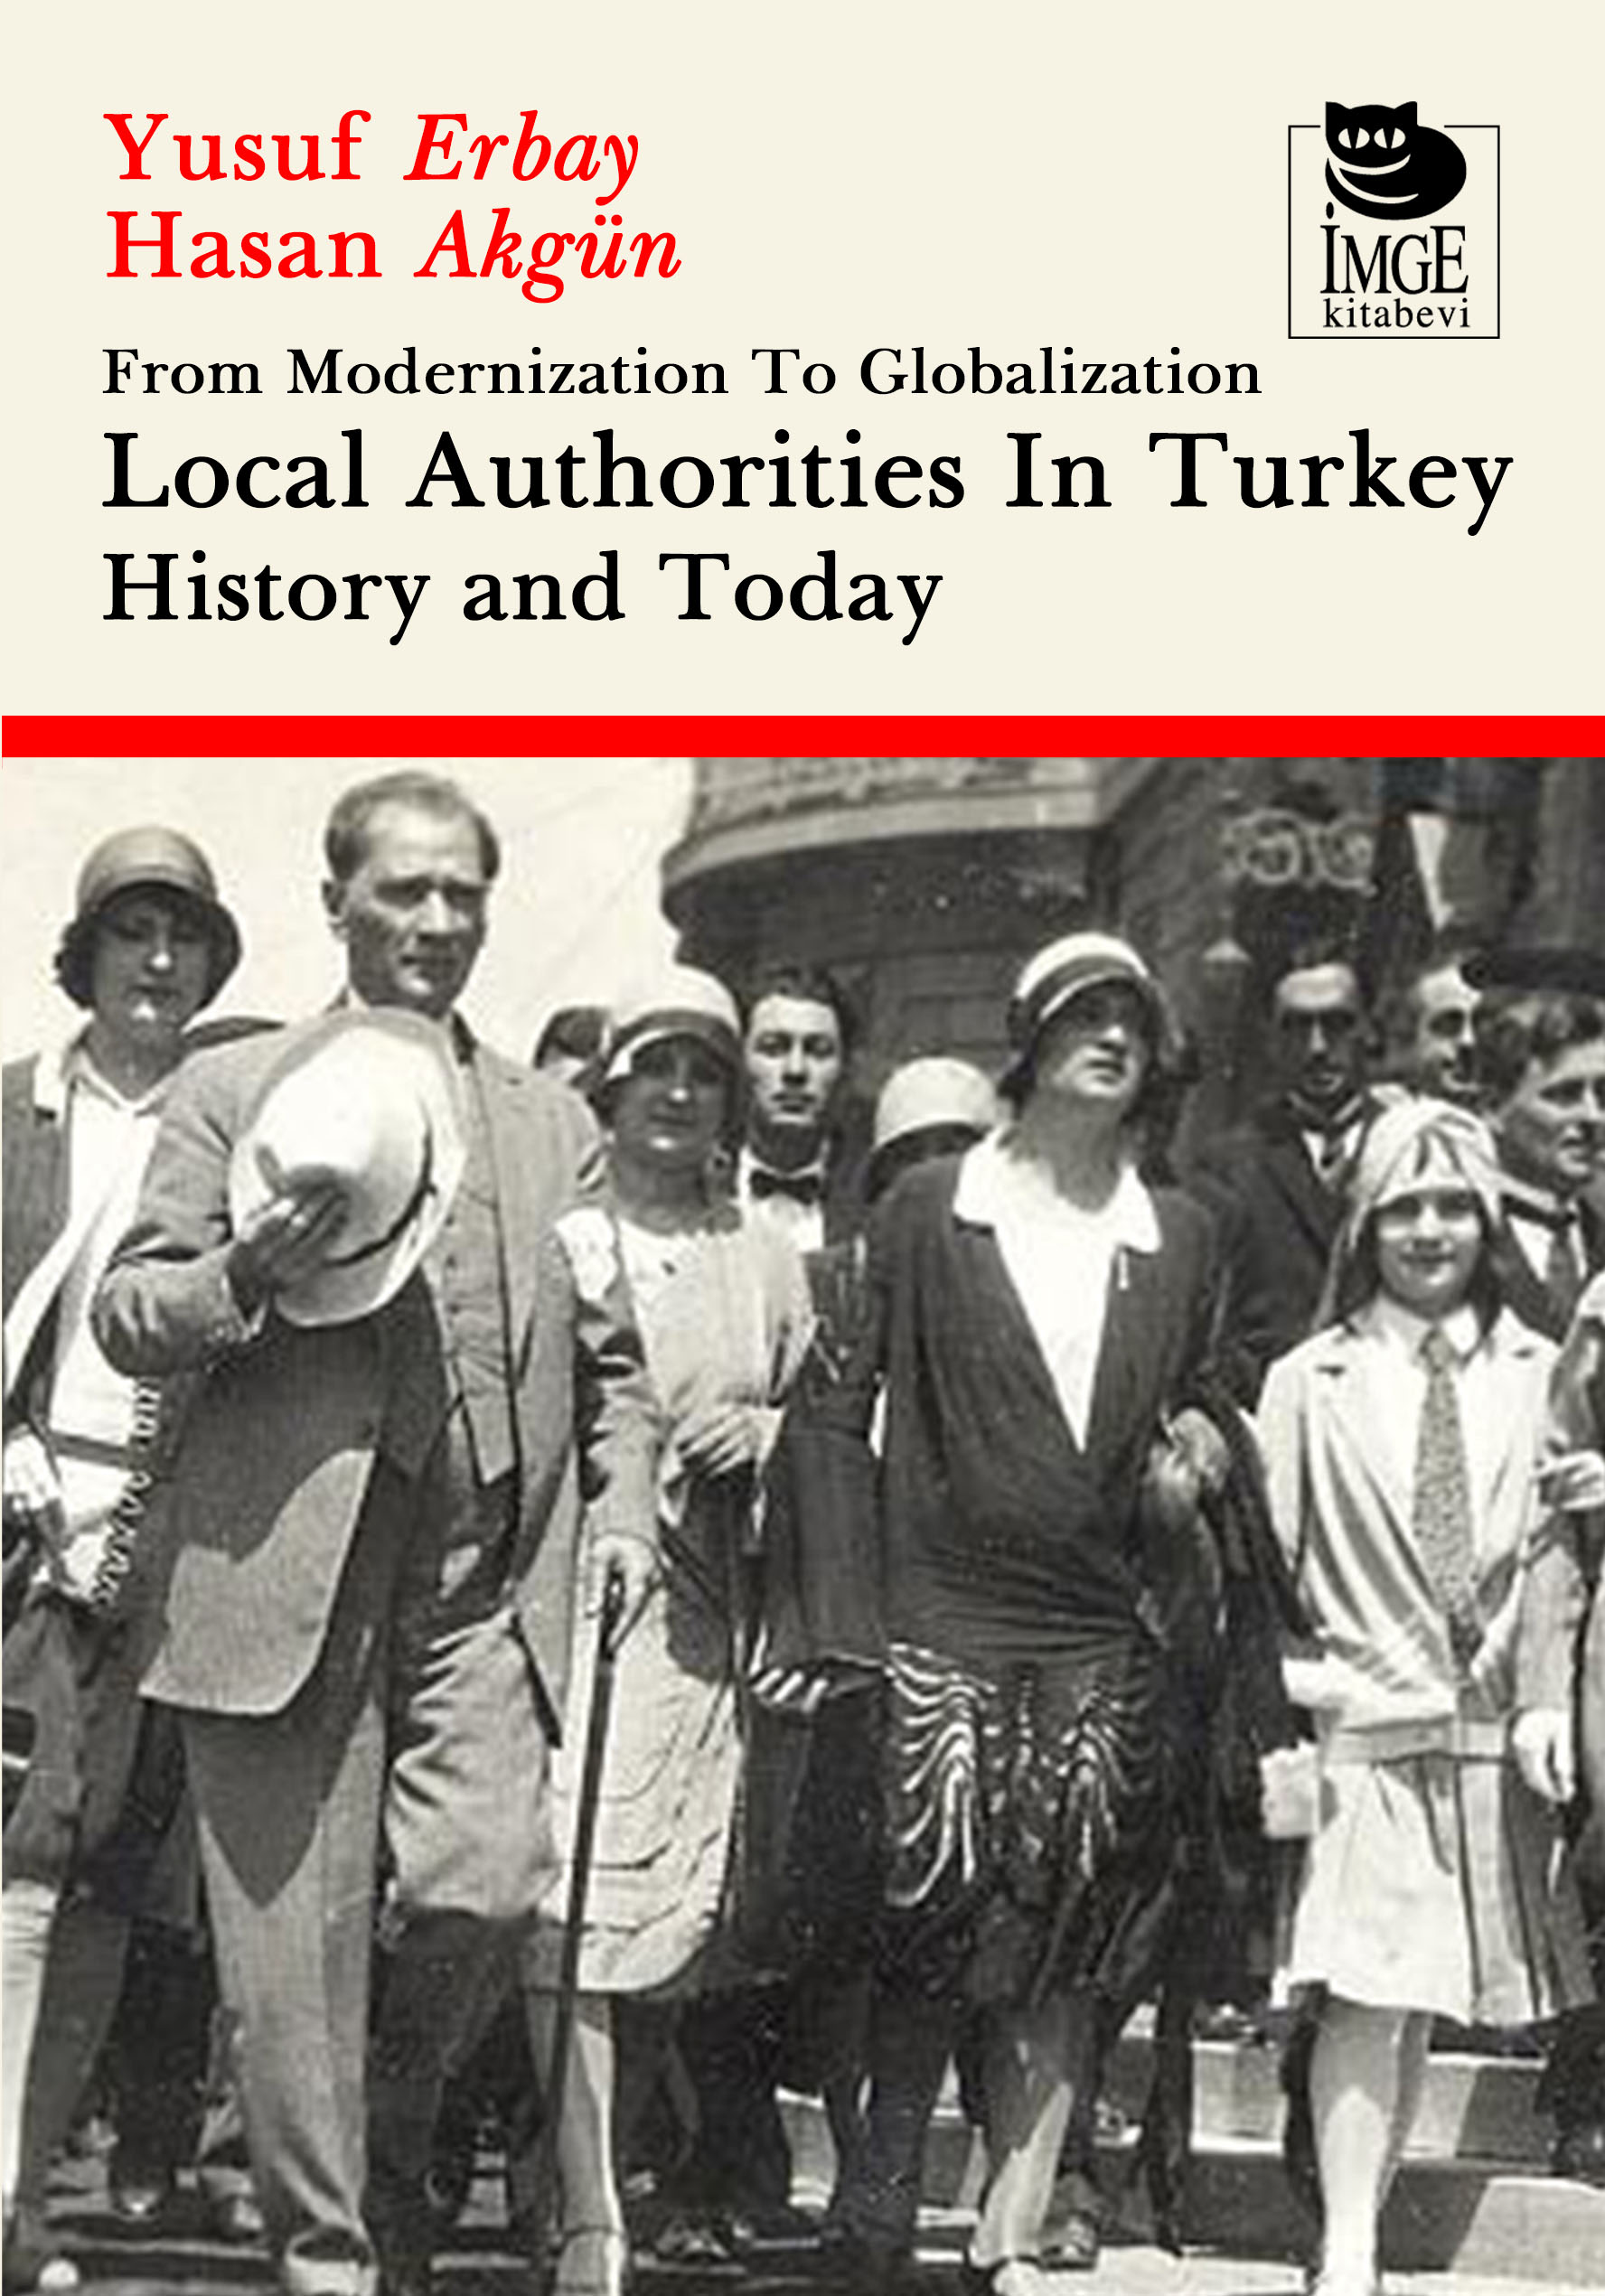 From Modernization to Globalization and Local Authorities in Turkey, History and Today